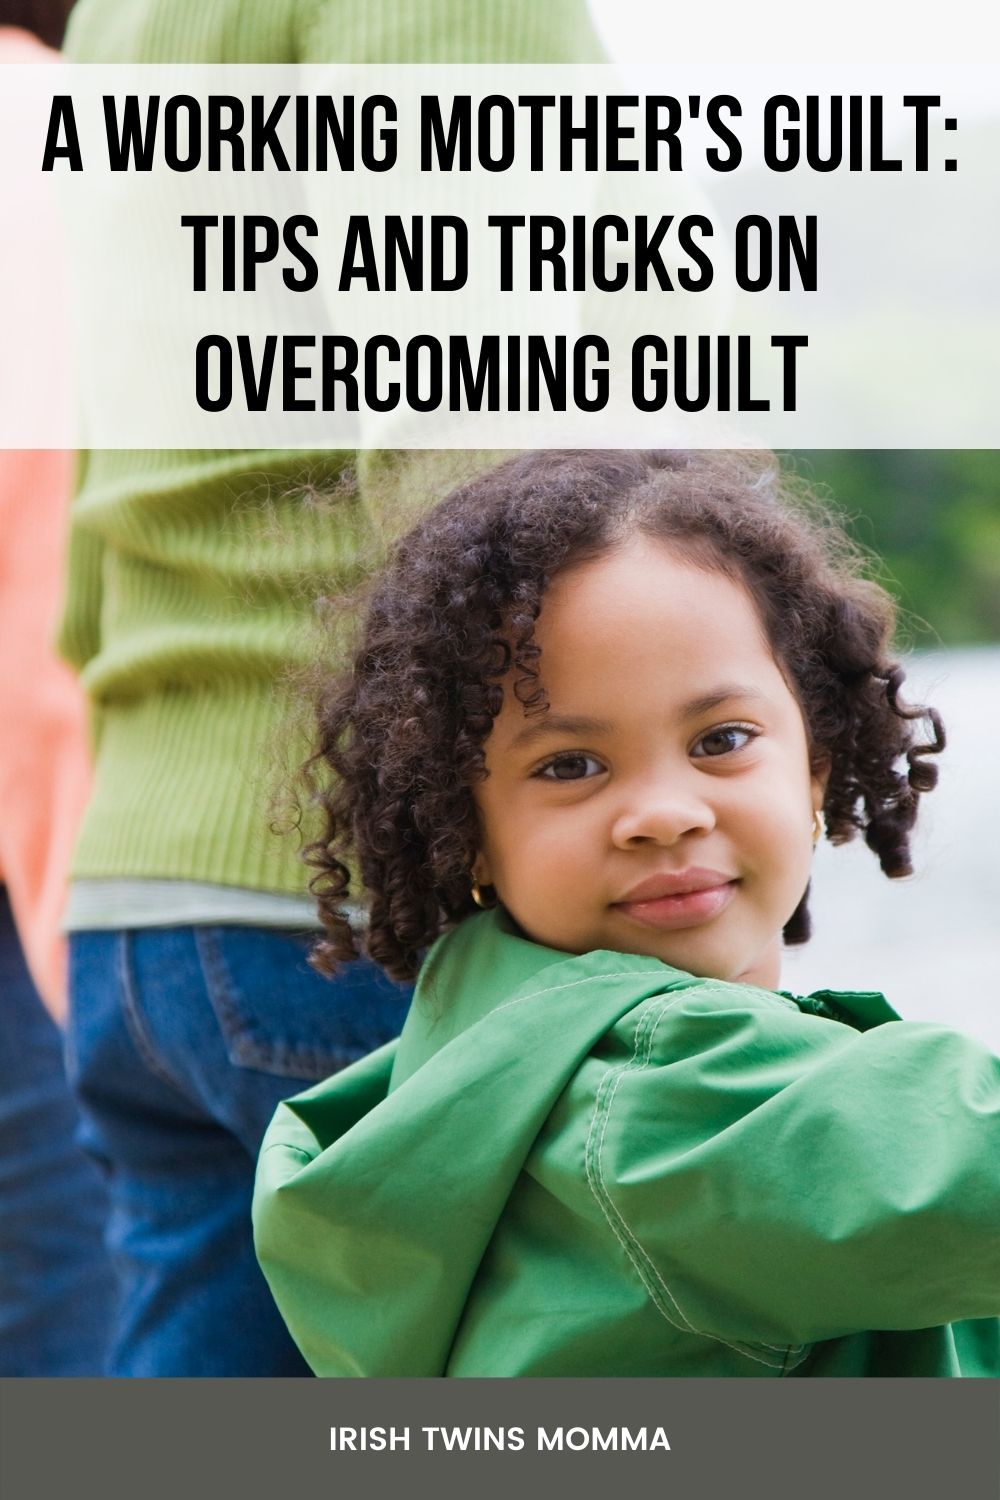 A Working Mother's Guilt: Tips and Tricks on Overcoming Guilt